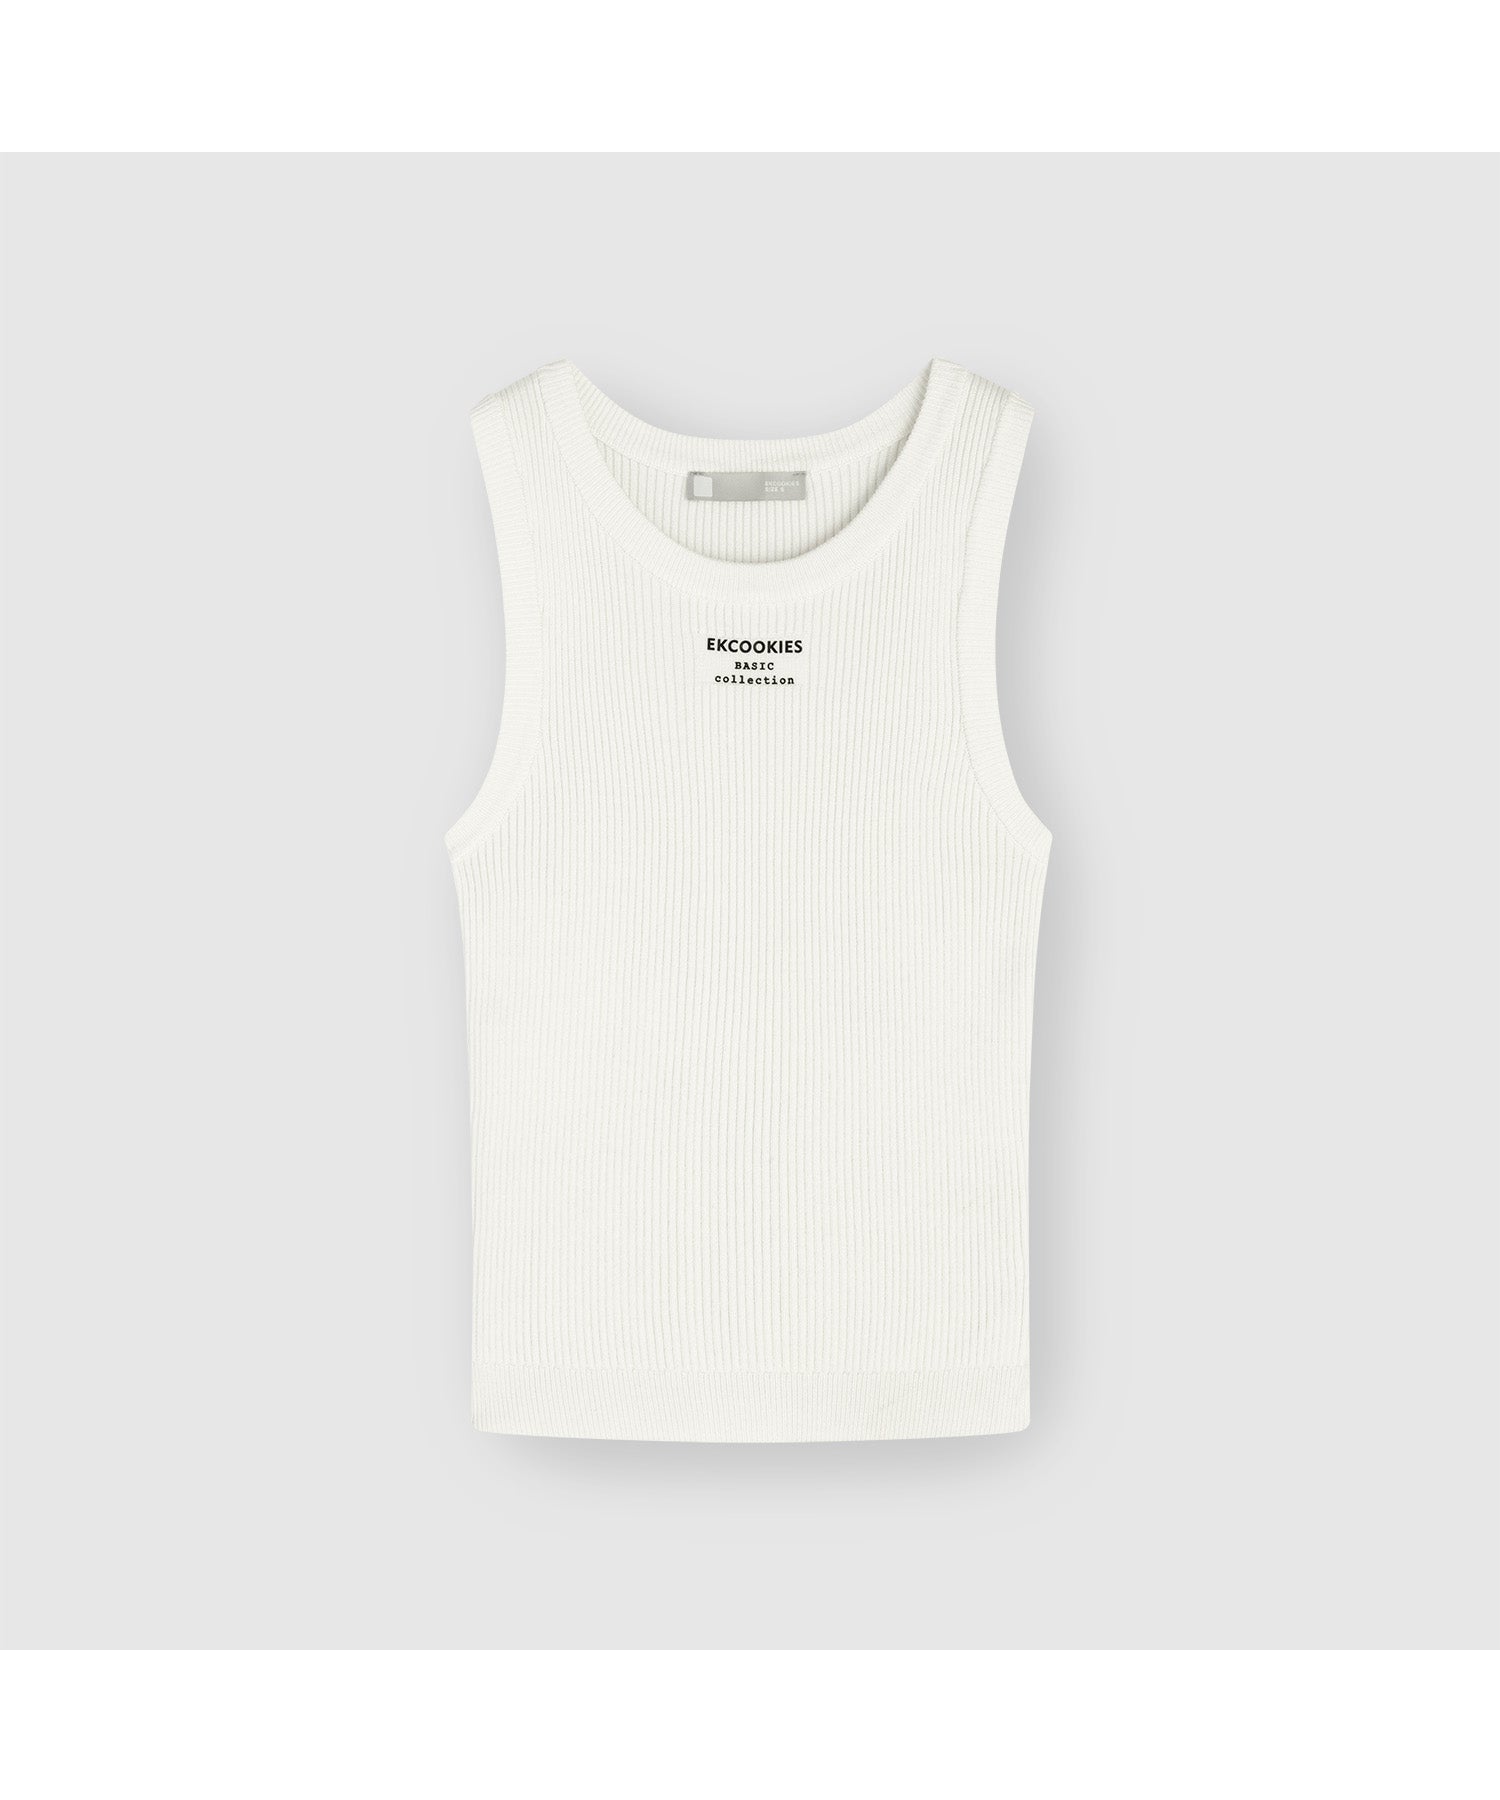 American sleeve rib tank top with front logo / inner 